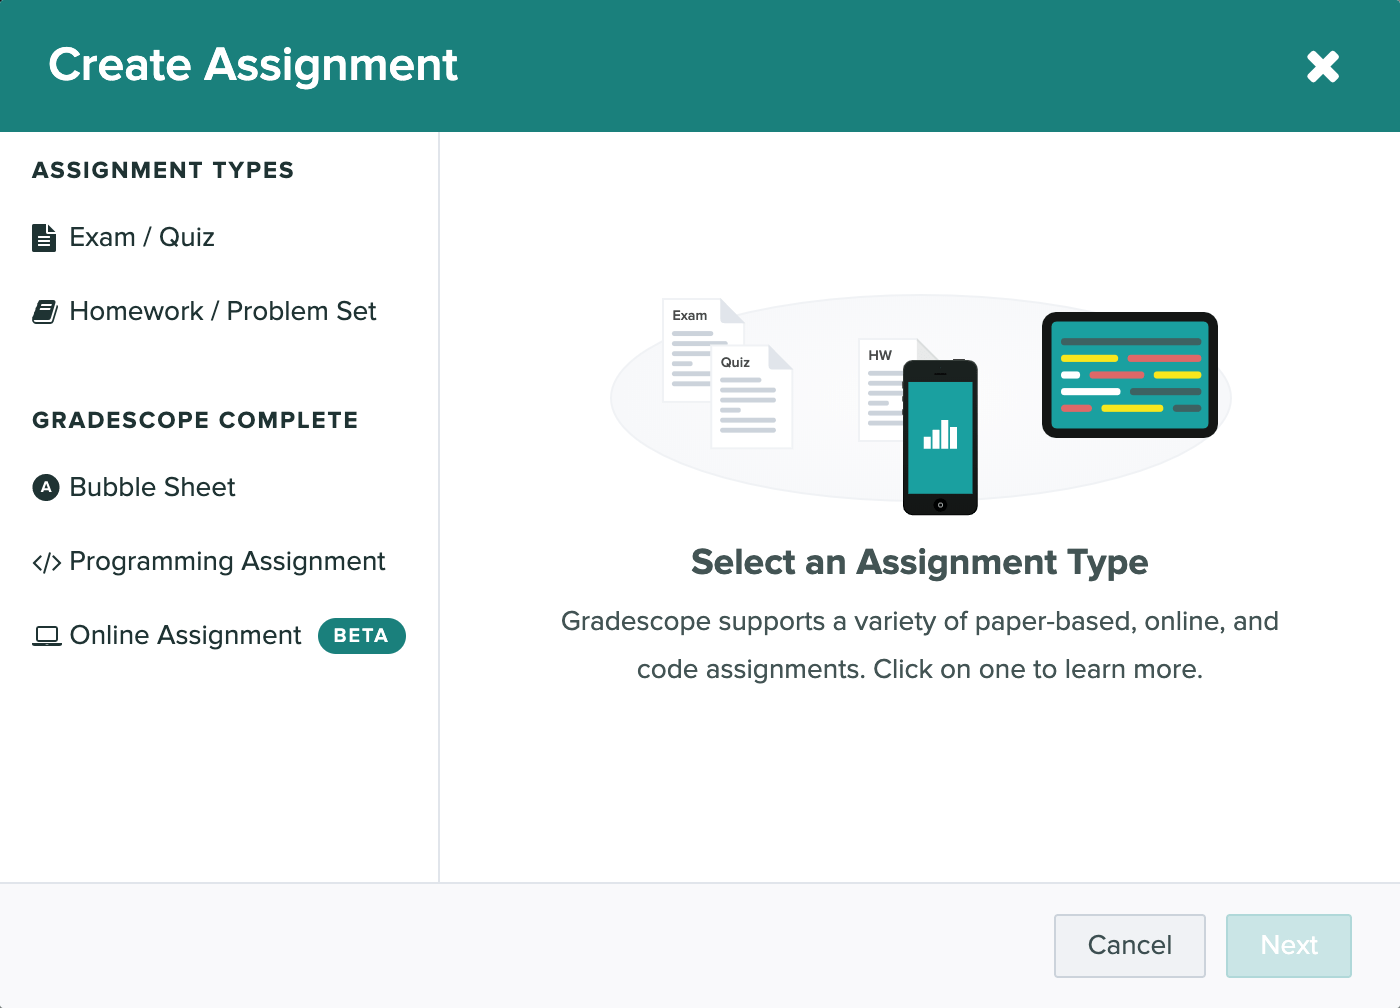 The create assignment modal is open showing the variety of assignments assignment types supported.